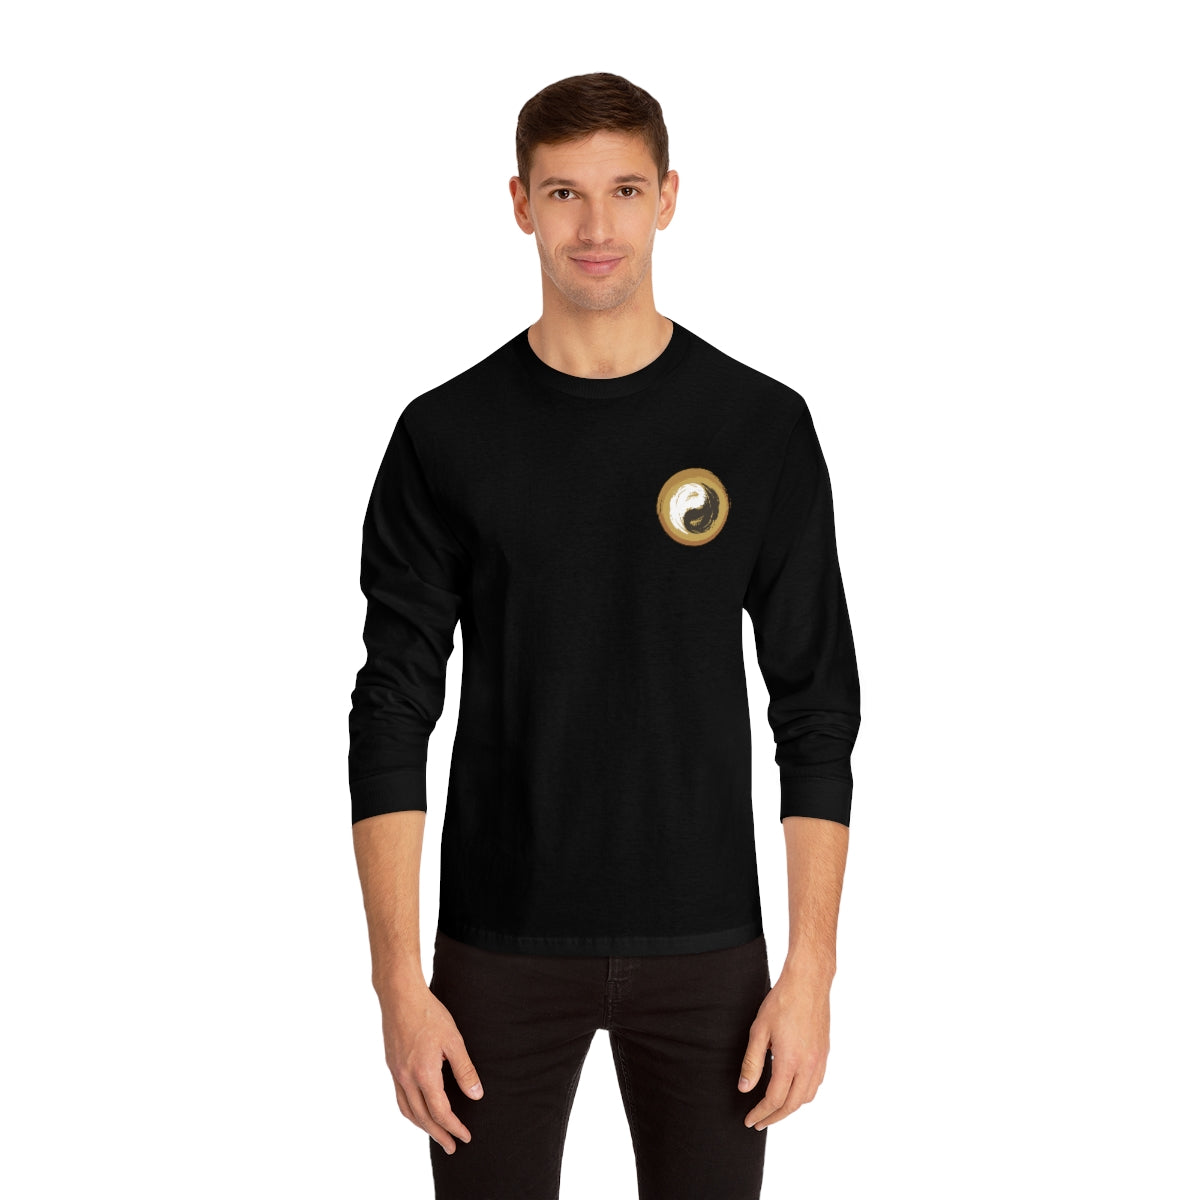 Unisex Classic Long Sleeve T-Shirt - Personal Hour for Yoga and Meditations 